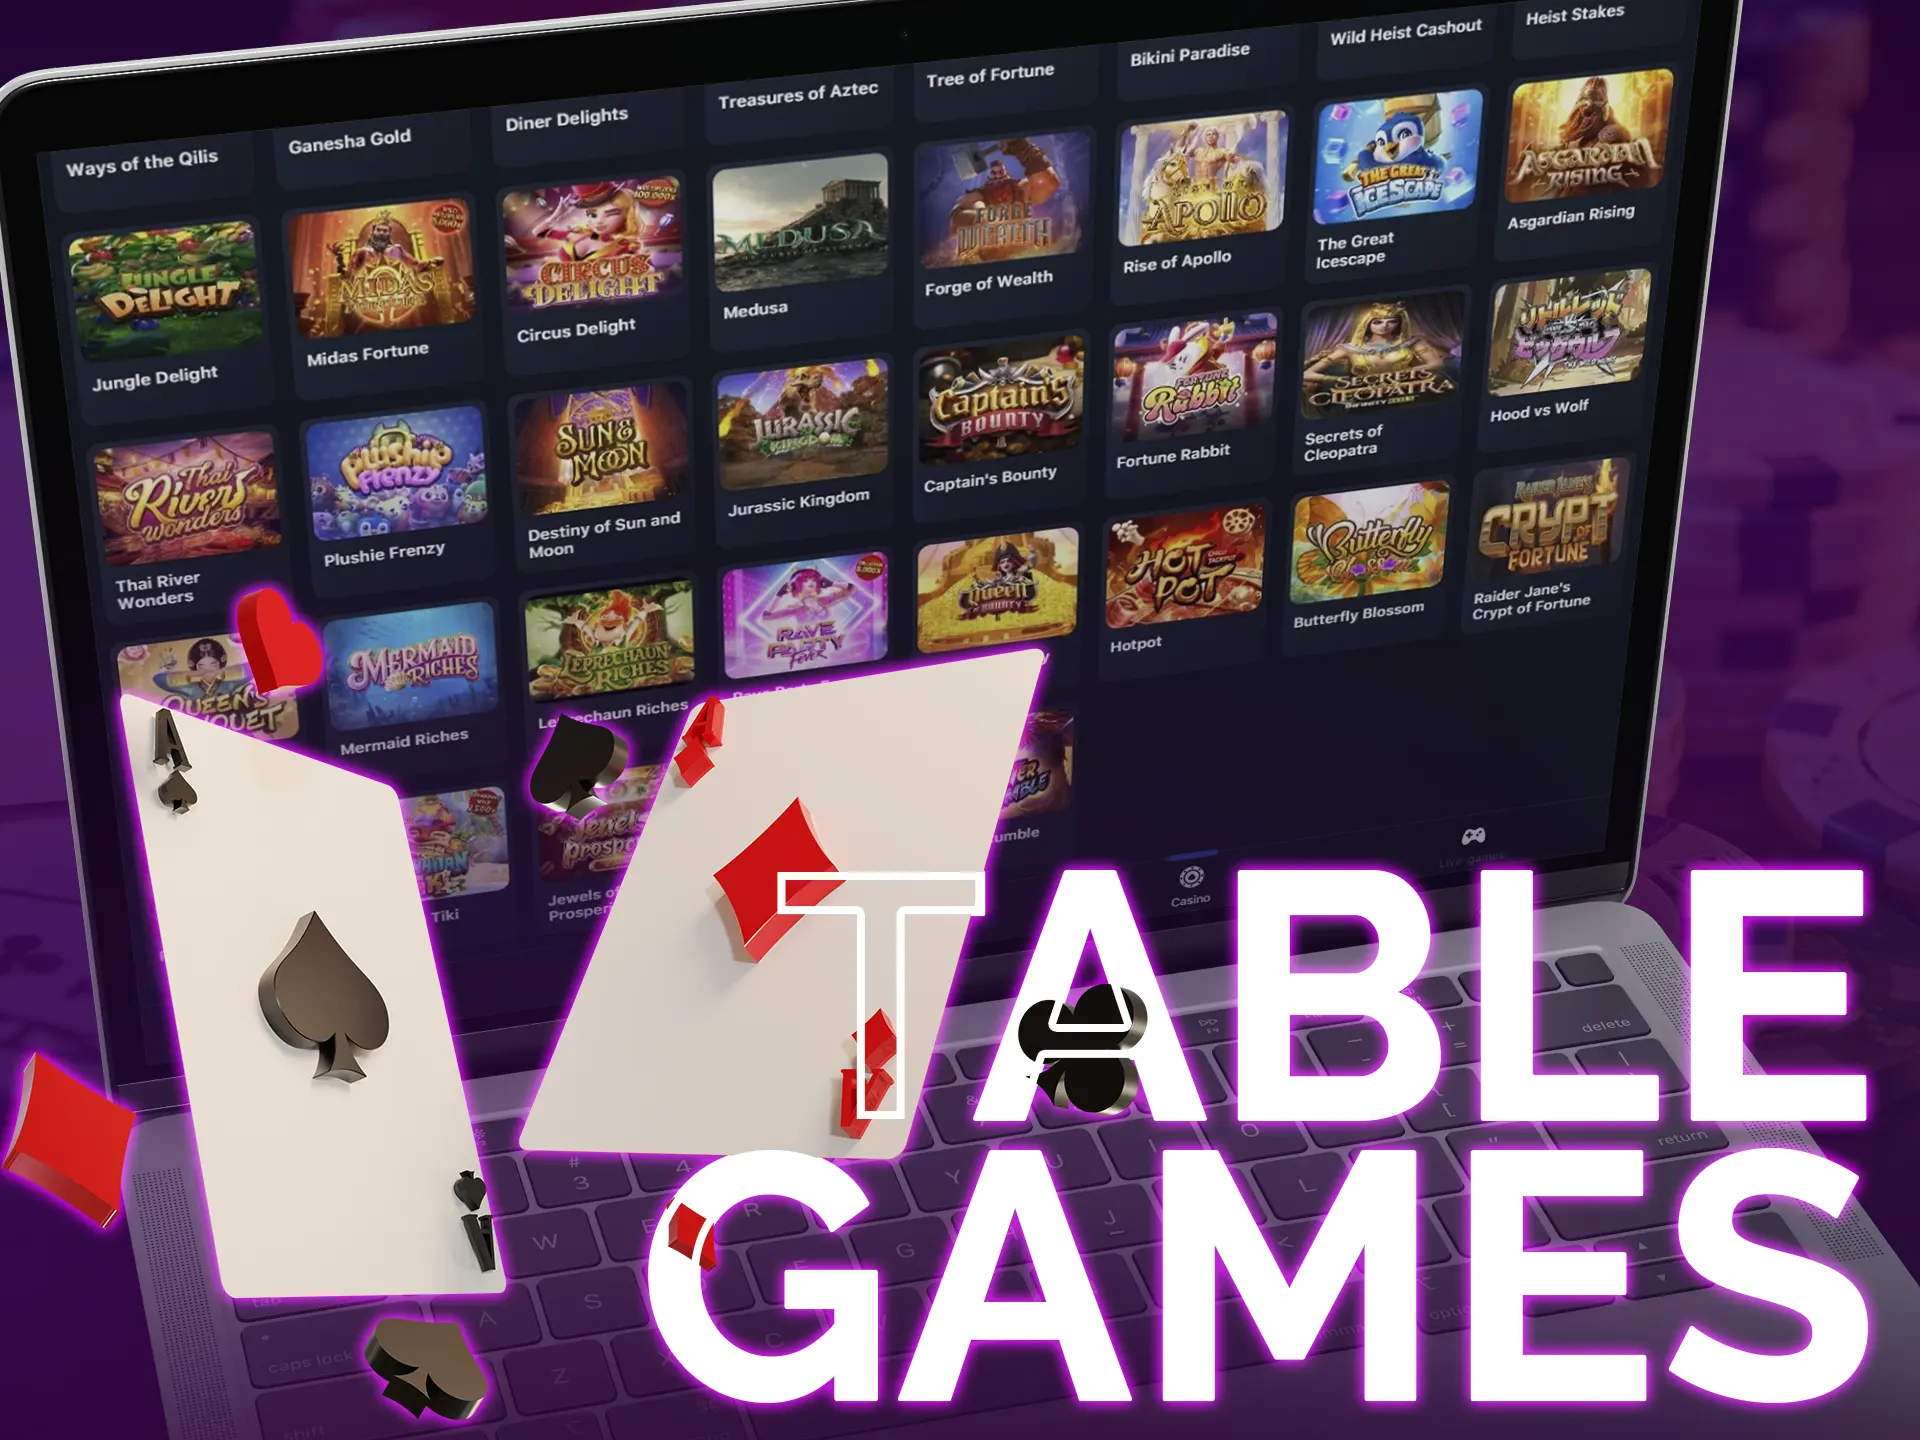 PG Soft offers table games like American Blackjack, Baccarat Deluxe, and more.